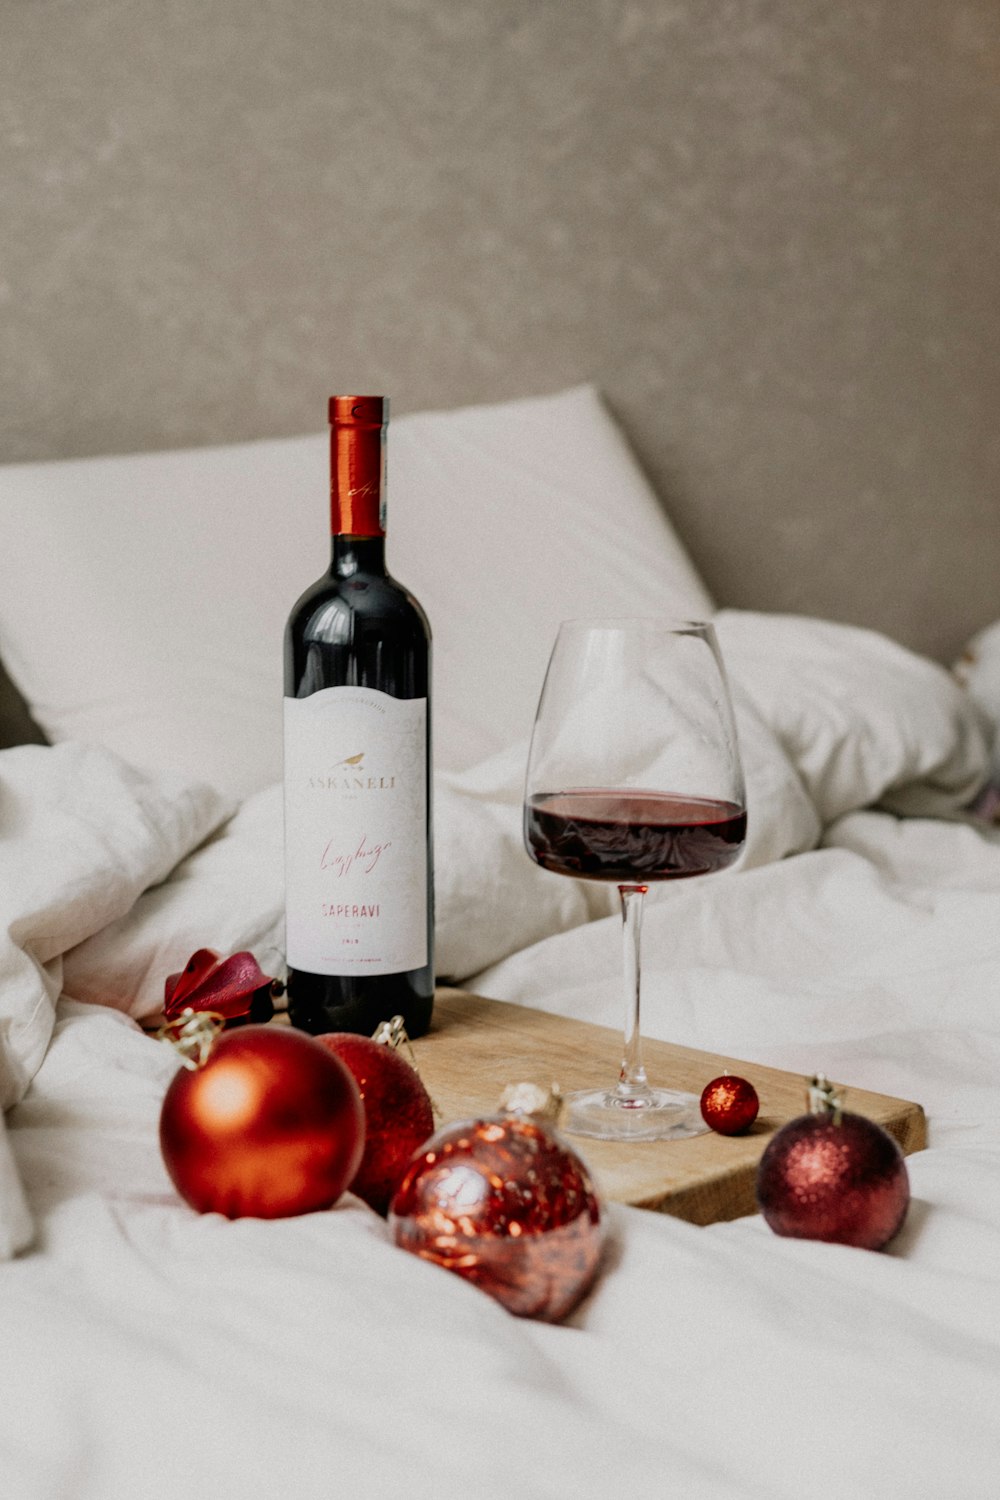 a bottle of wine and a glass of wine on a bed